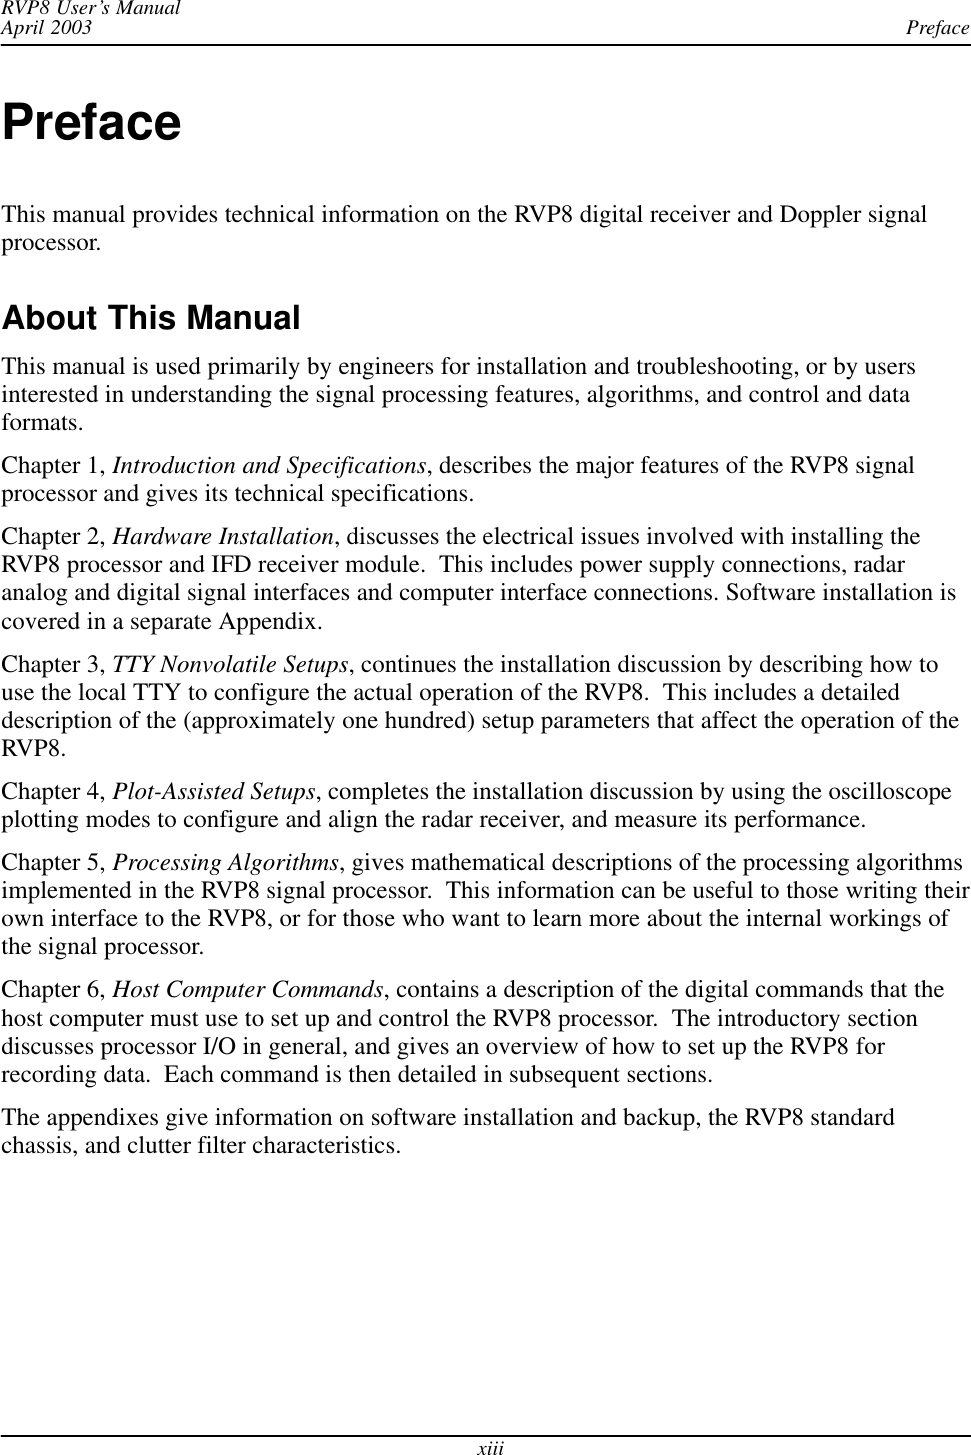 PrefaceRVP8 User’s ManualApril 2003xiiiPrefaceThis manual provides technical information on the RVP8 digital receiver and Doppler signalprocessor.About This ManualThis manual is used primarily by engineers for installation and troubleshooting, or by usersinterested in understanding the signal processing features, algorithms, and control and dataformats.Chapter 1, Introduction and Specifications, describes the major features of the RVP8 signalprocessor and gives its technical specifications.Chapter 2, Hardware Installation, discusses the electrical issues involved with installing theRVP8 processor and IFD receiver module.  This includes power supply connections, radaranalog and digital signal interfaces and computer interface connections. Software installation iscovered in a separate Appendix.Chapter 3, TTY Nonvolatile Setups, continues the installation discussion by describing how touse the local TTY to configure the actual operation of the RVP8.  This includes a detaileddescription of the (approximately one hundred) setup parameters that affect the operation of theRVP8.Chapter 4, Plot-Assisted Setups, completes the installation discussion by using the oscilloscopeplotting modes to configure and align the radar receiver, and measure its performance.Chapter 5, Processing Algorithms, gives mathematical descriptions of the processing algorithmsimplemented in the RVP8 signal processor.  This information can be useful to those writing theirown interface to the RVP8, or for those who want to learn more about the internal workings ofthe signal processor.Chapter 6, Host Computer Commands, contains a description of the digital commands that thehost computer must use to set up and control the RVP8 processor.  The introductory sectiondiscusses processor I/O in general, and gives an overview of how to set up the RVP8 forrecording data.  Each command is then detailed in subsequent sections.The appendixes give information on software installation and backup, the RVP8 standardchassis, and clutter filter characteristics.